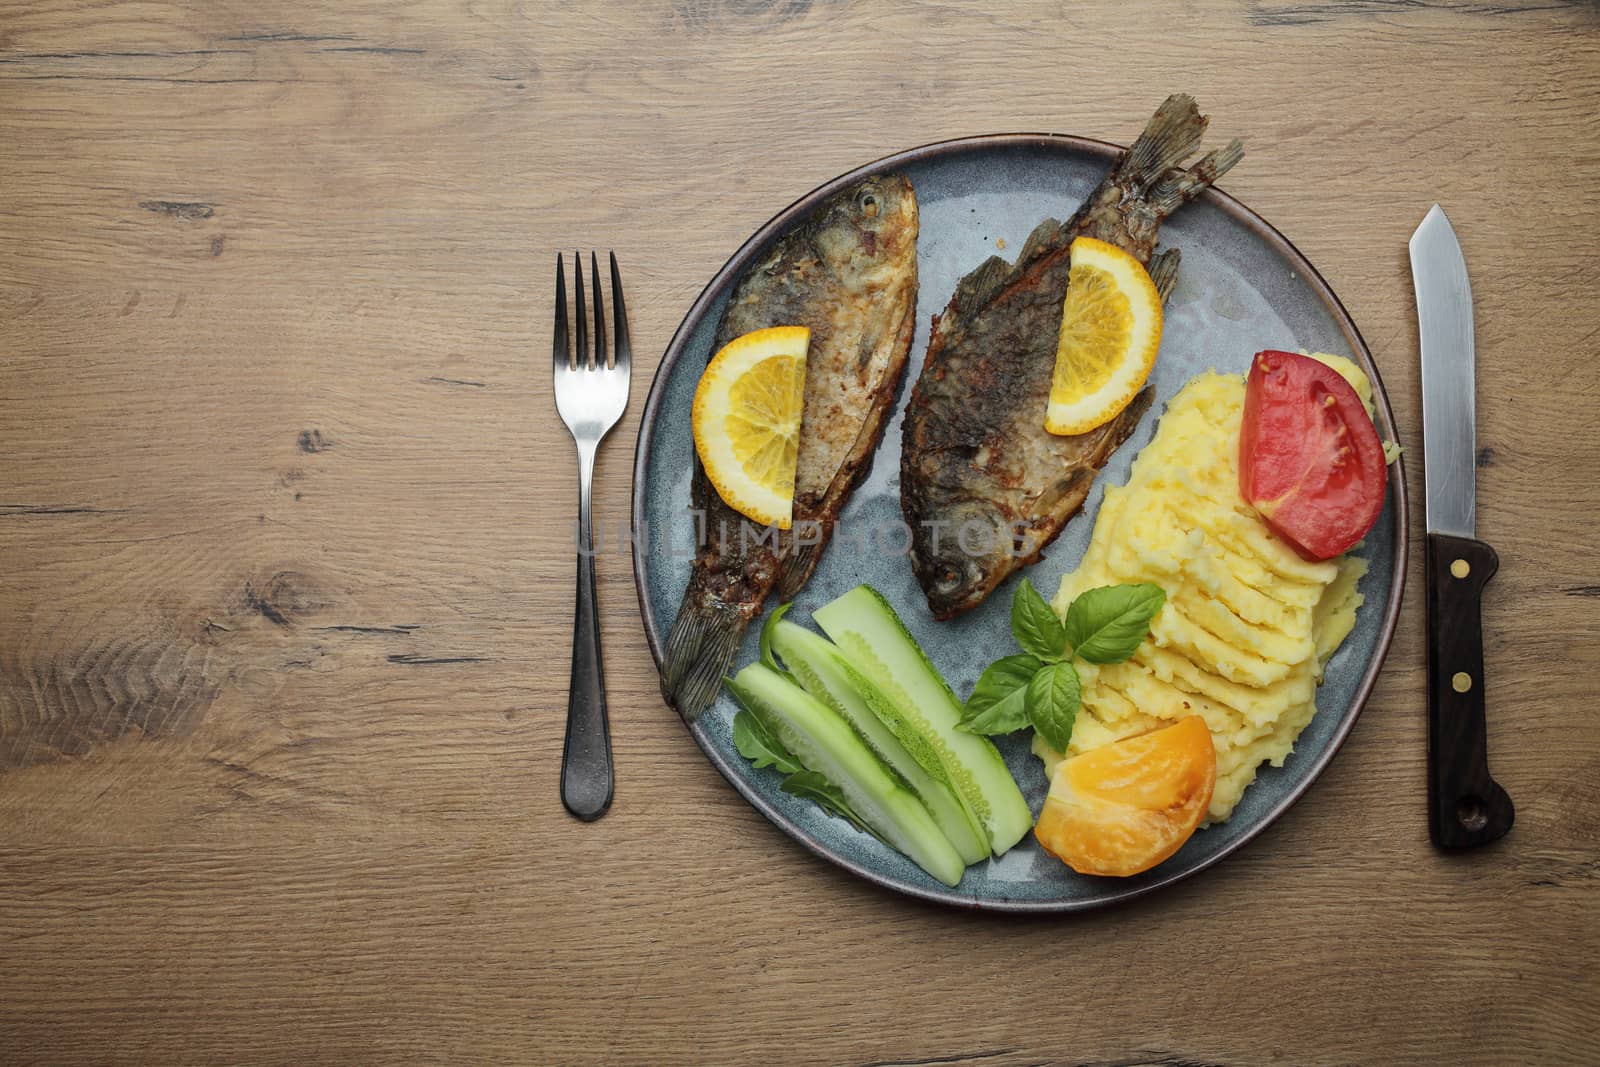 Fried fish and vegetables on a plate. On a wooden table by selinsmo